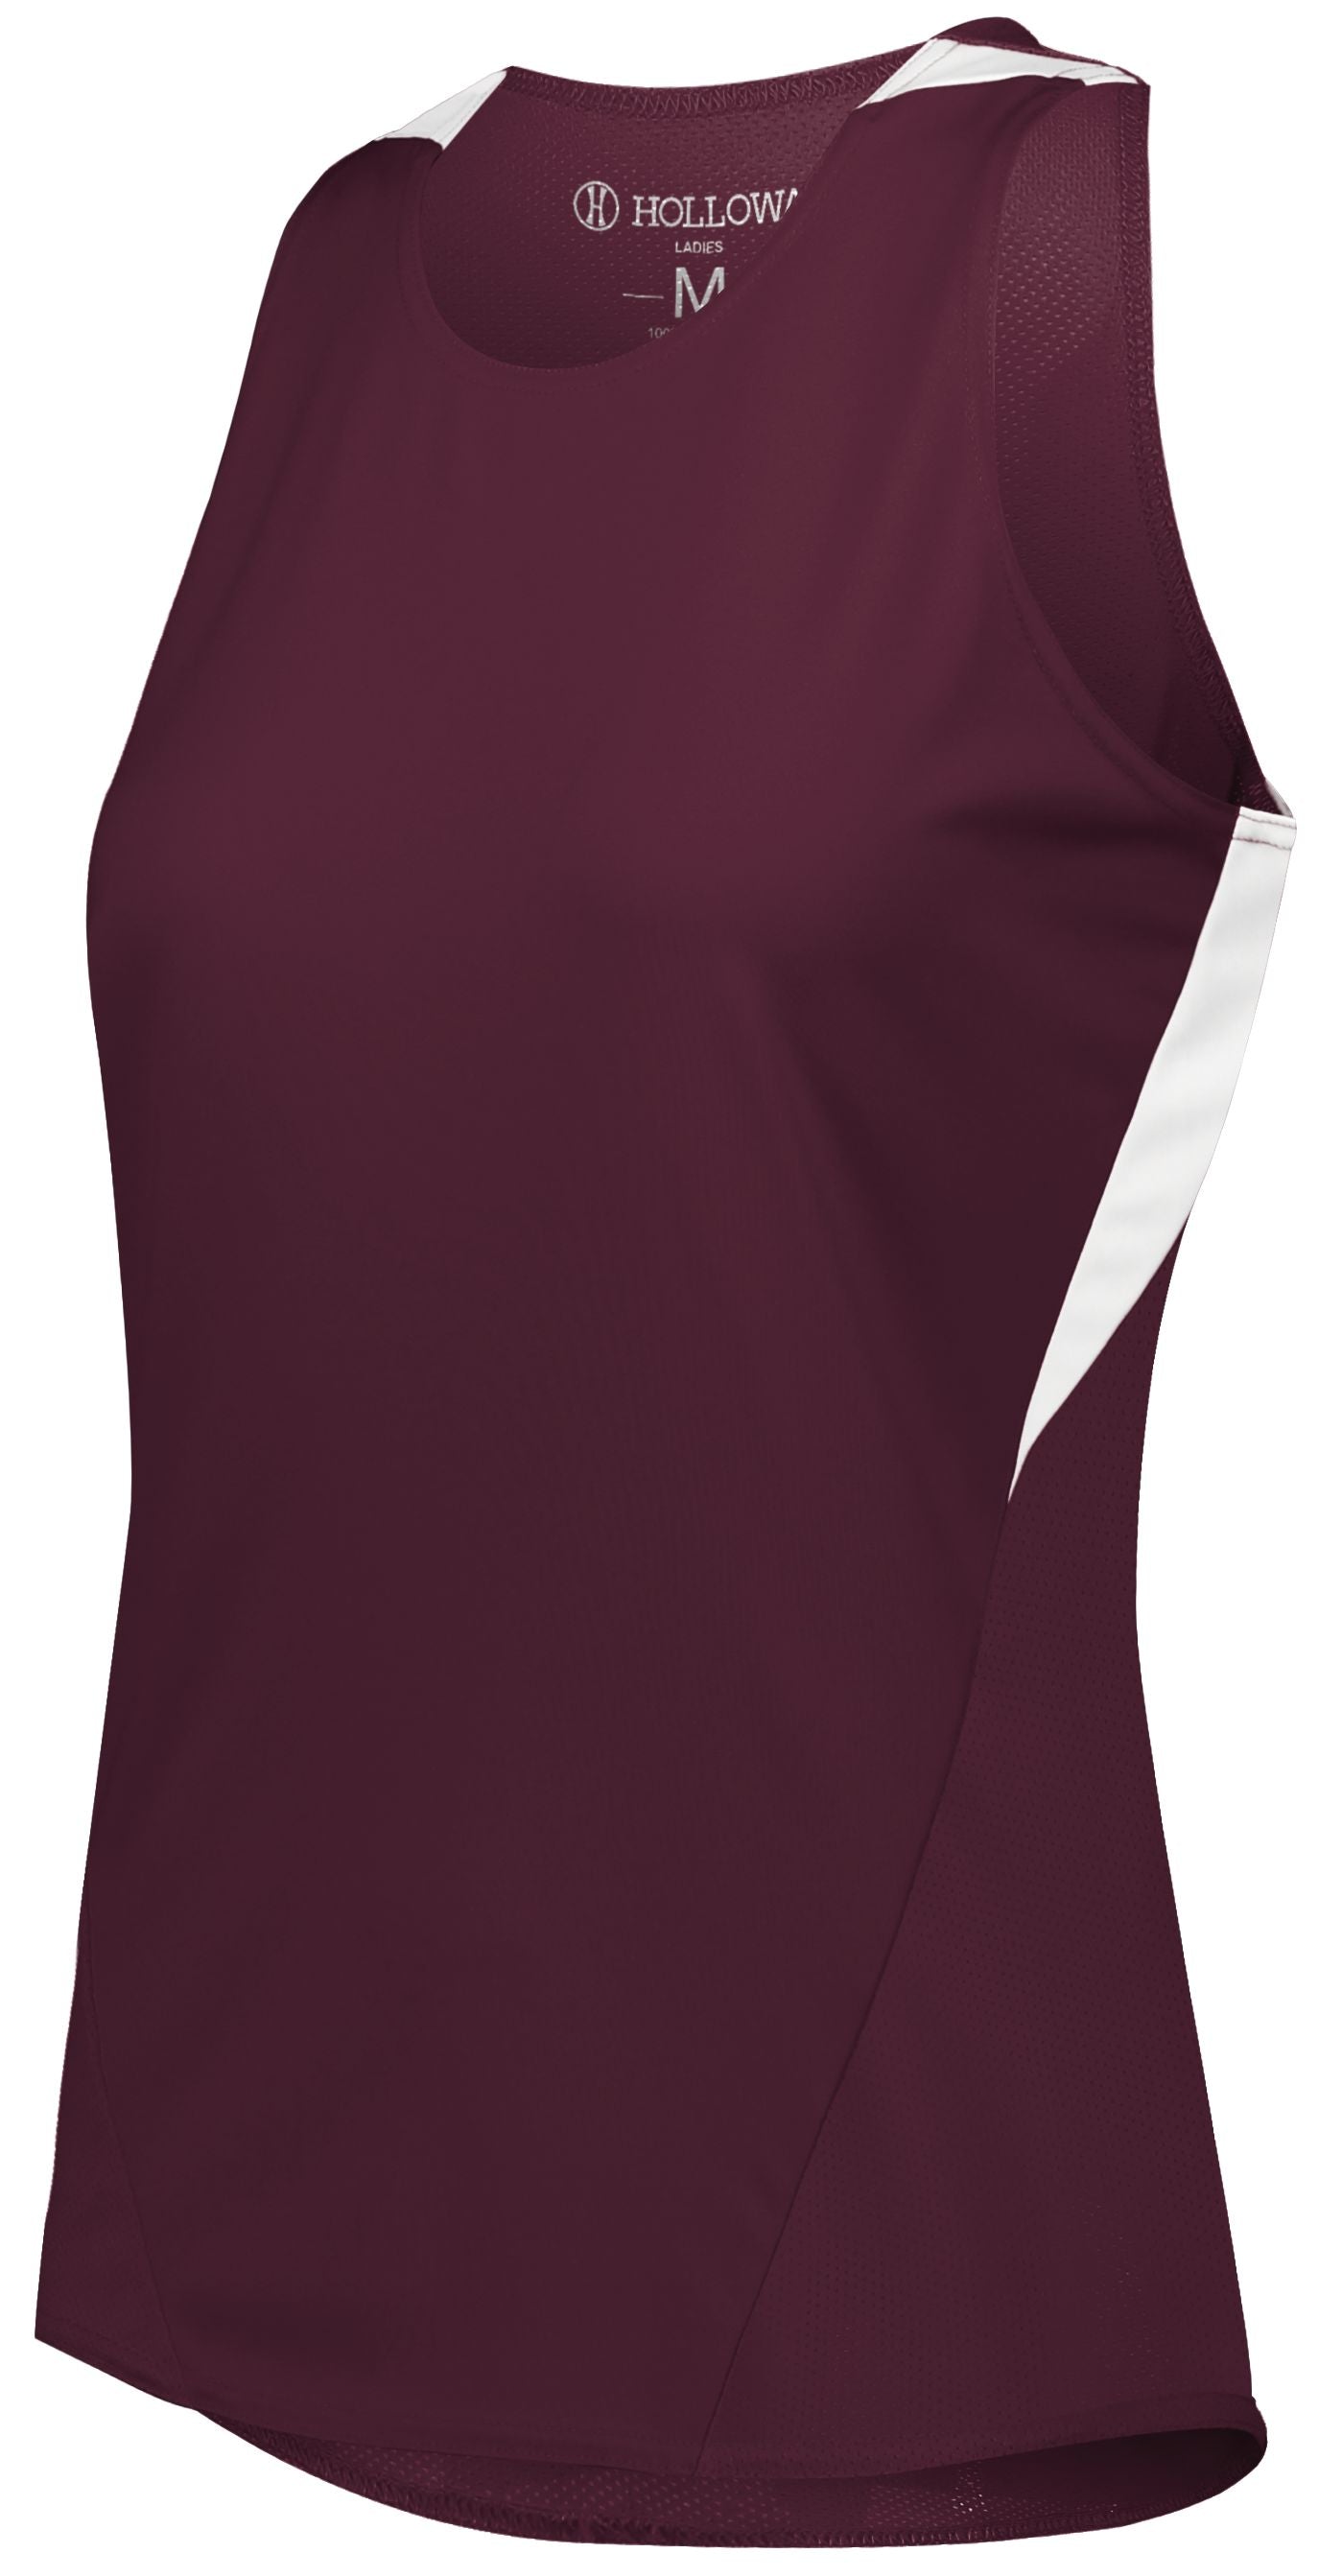 Holloway Ladies Pr Max Track Jersey in Maroon/White  -Part of the Ladies, Ladies-Jersey, Track-Field, Holloway, Shirts product lines at KanaleyCreations.com